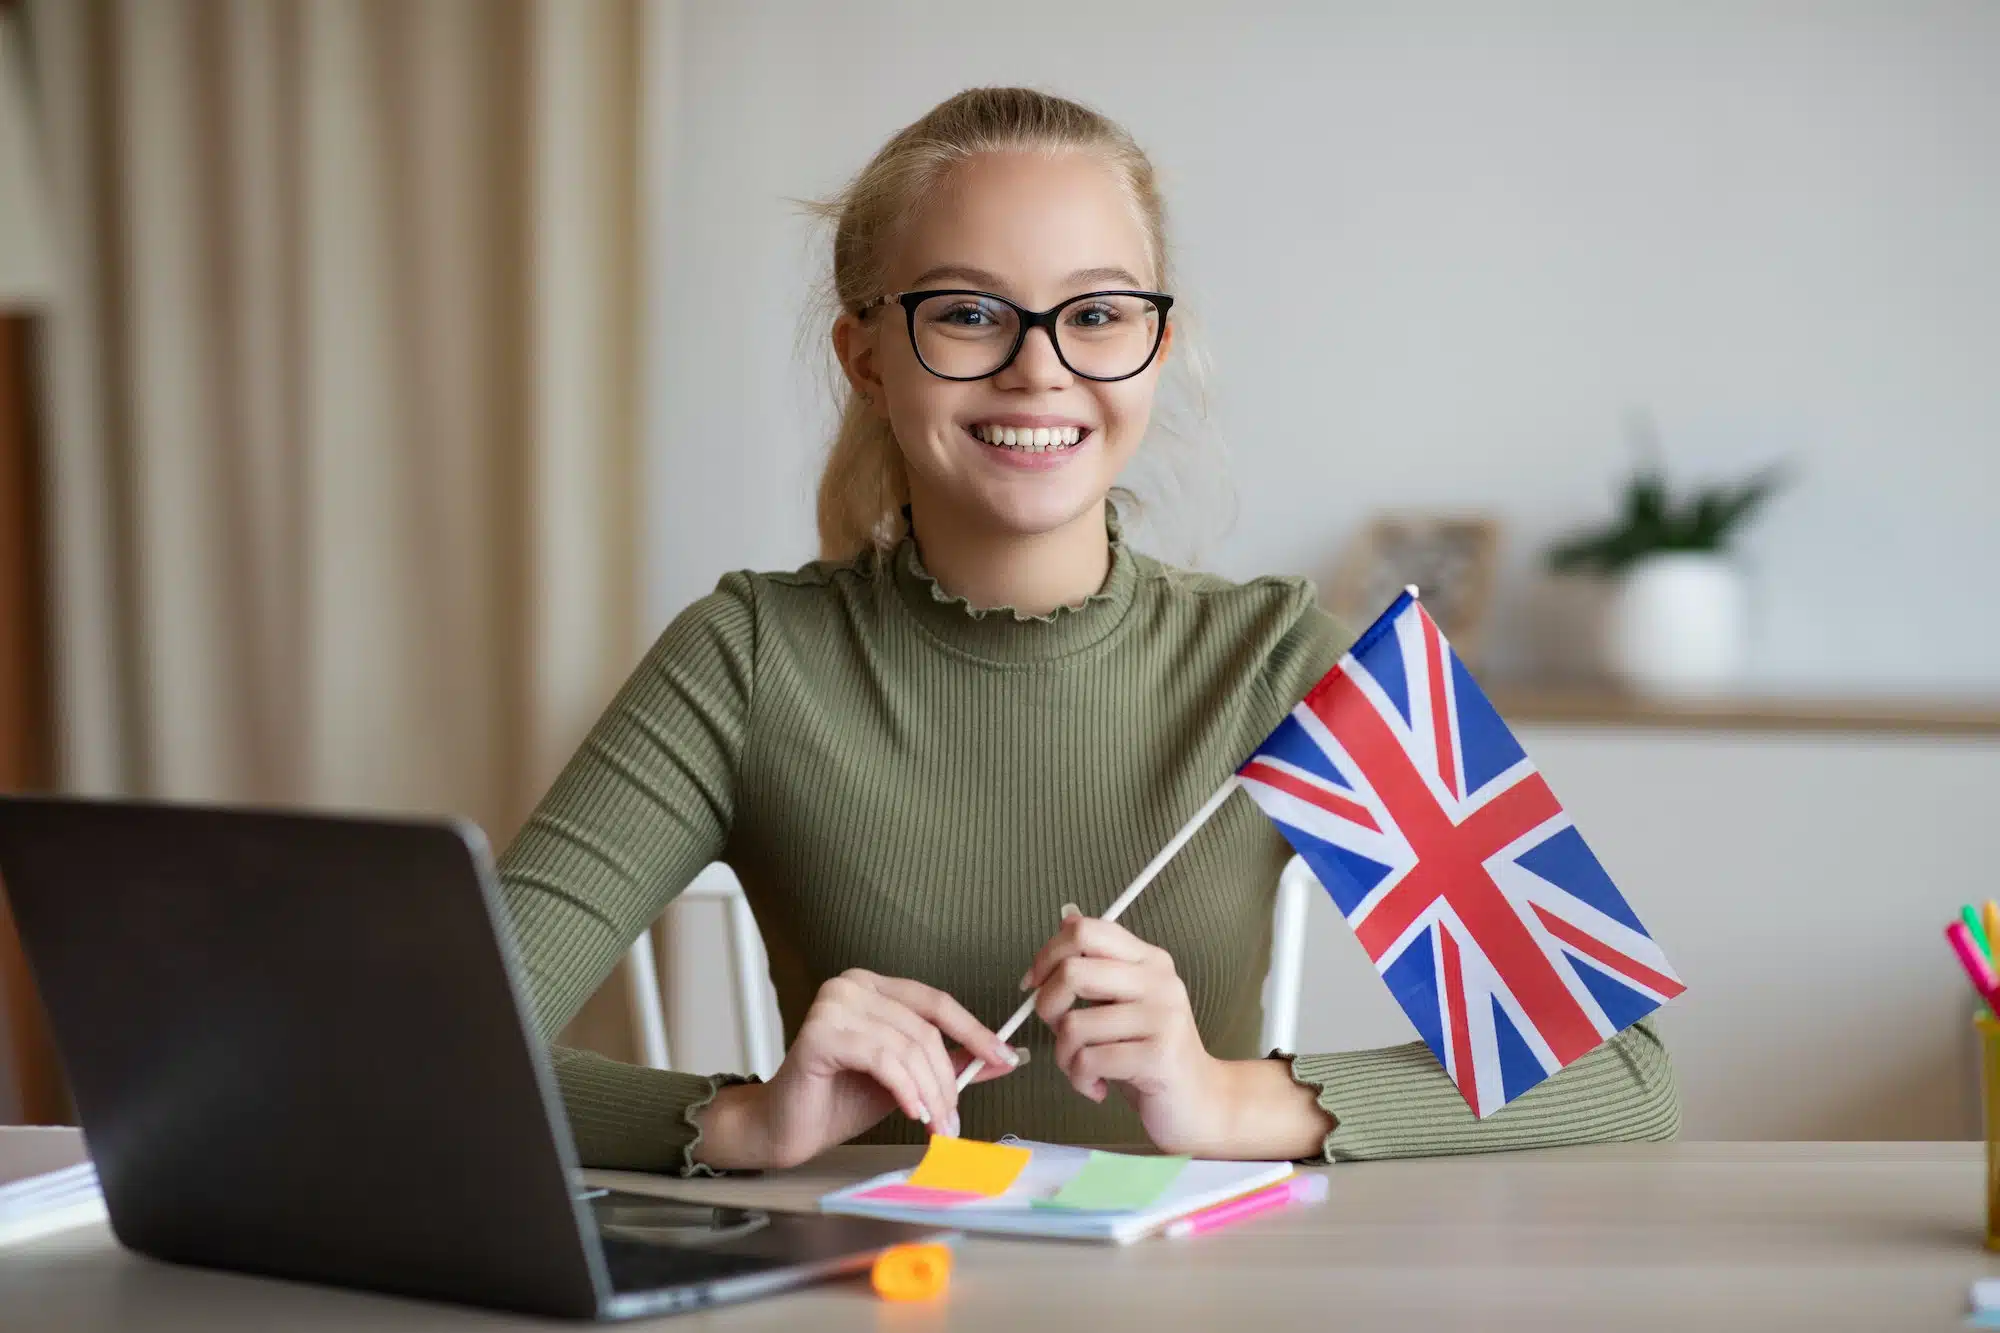 Smiling girl with flag of Great Britain using laptop